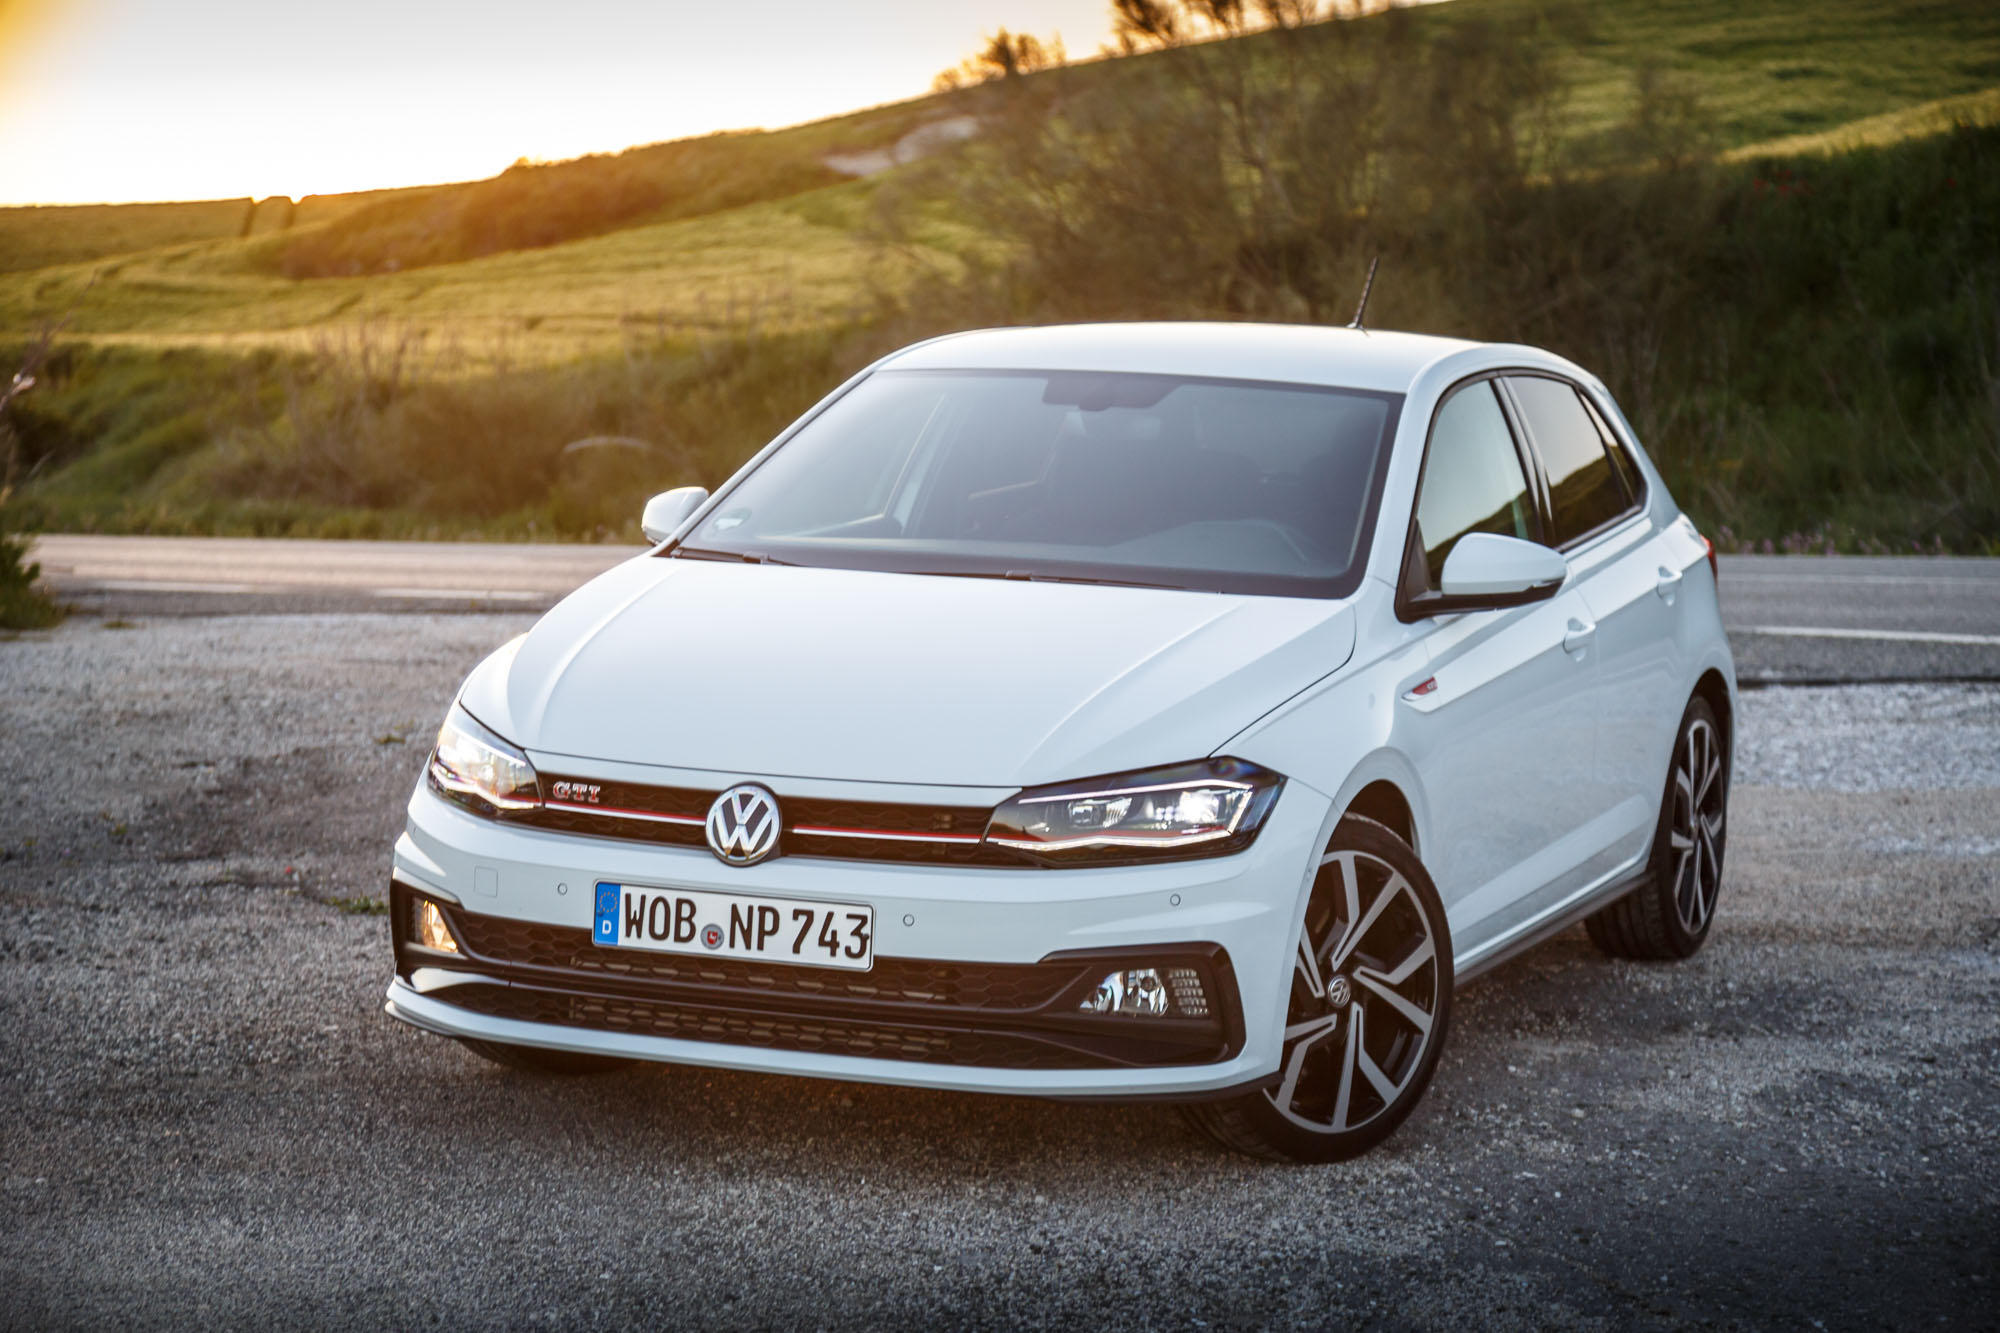 Volkswagen Polo  GTI Review The Polo  Closes the Gap on the 